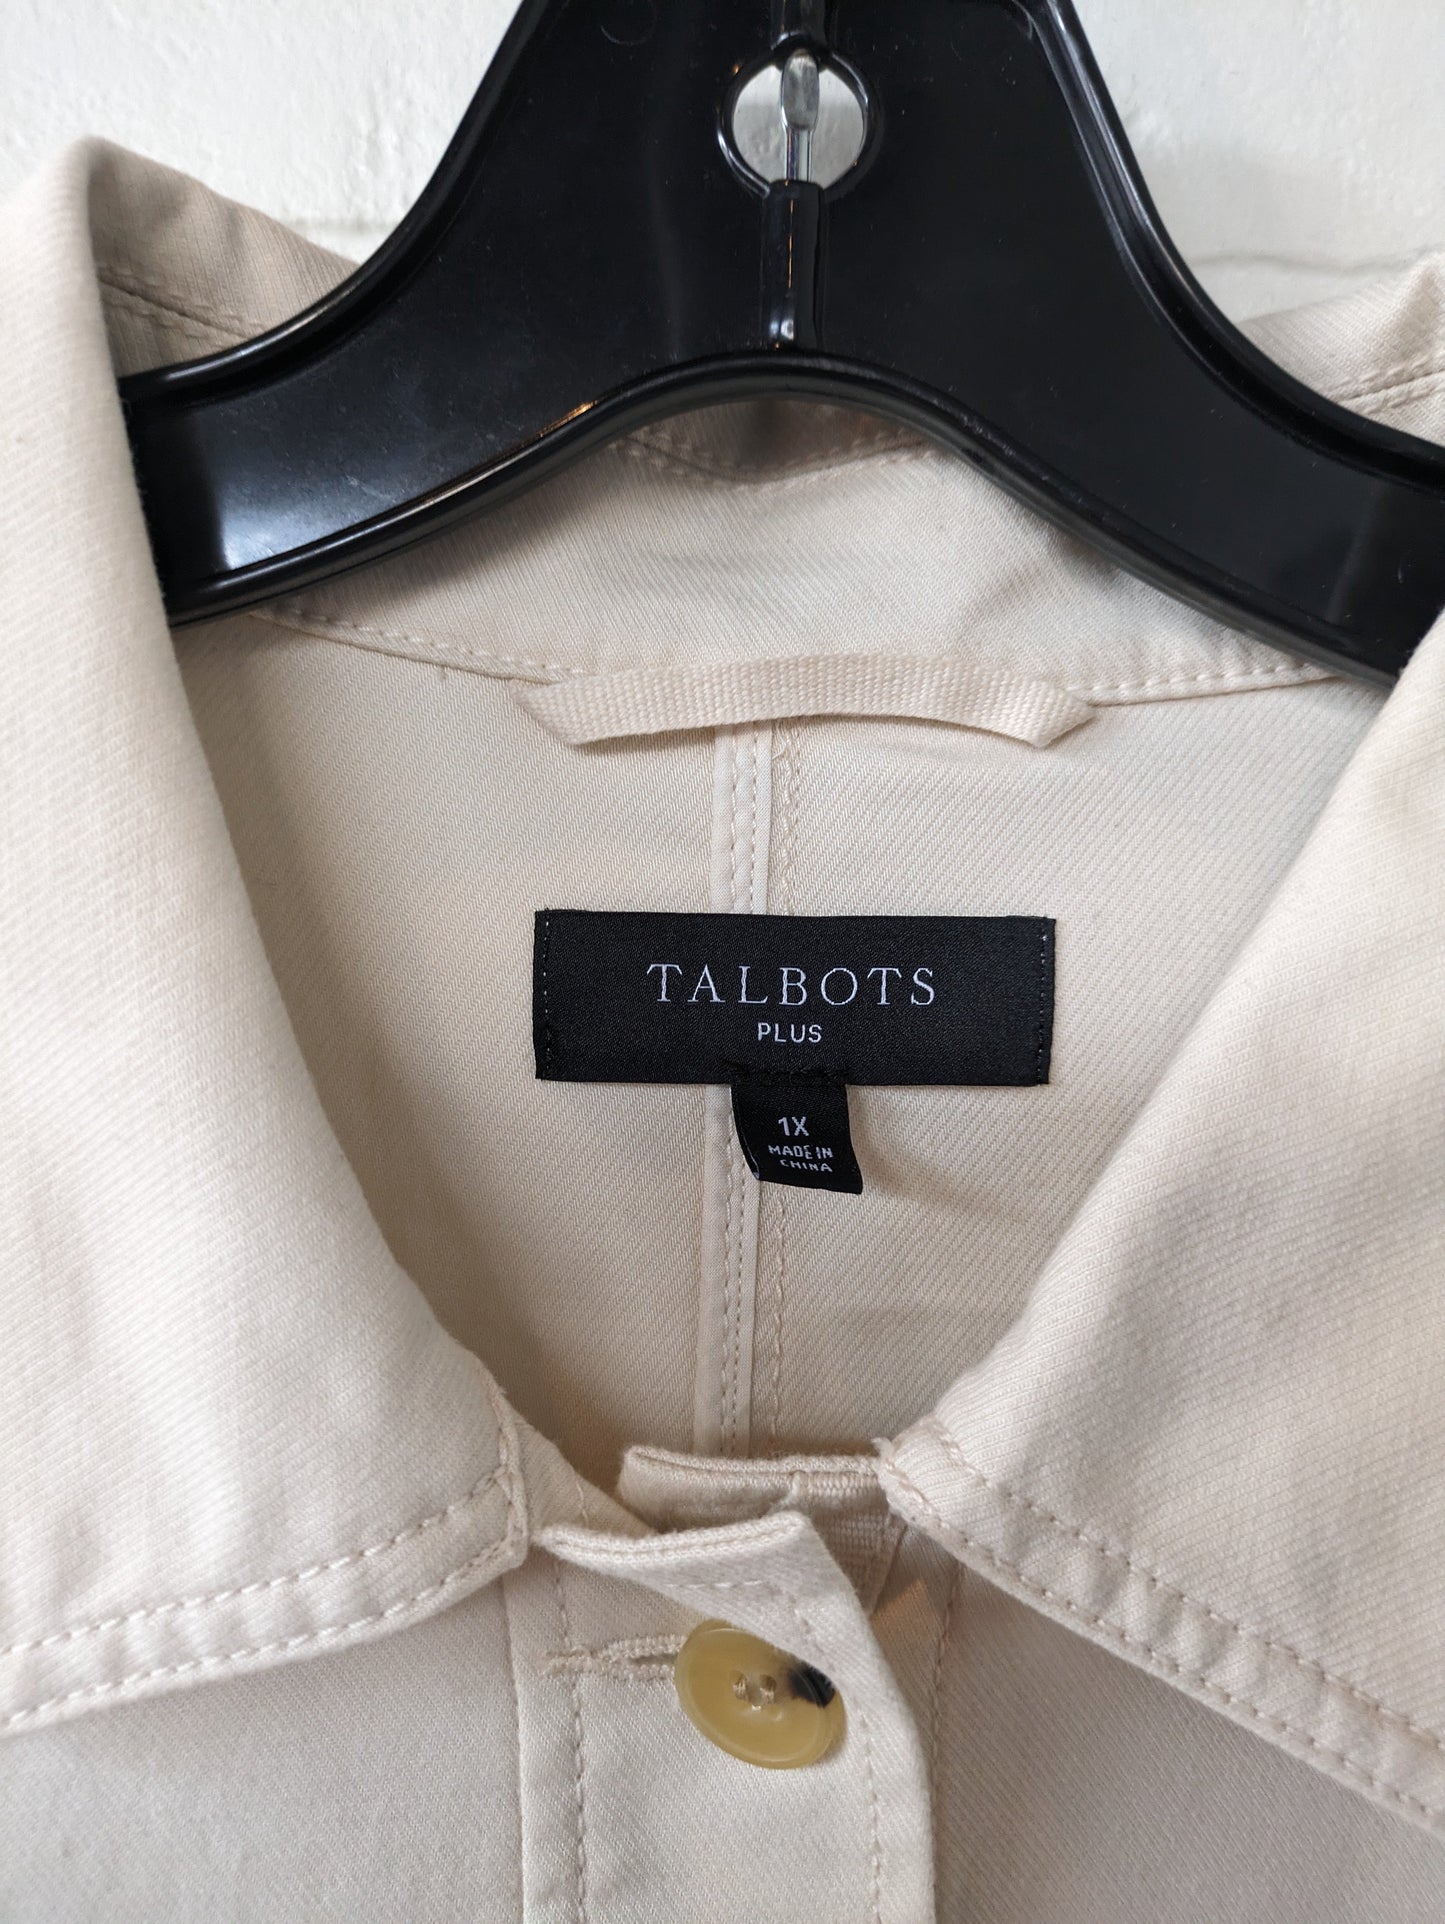 Jacket Other By Talbots  Size: 1x